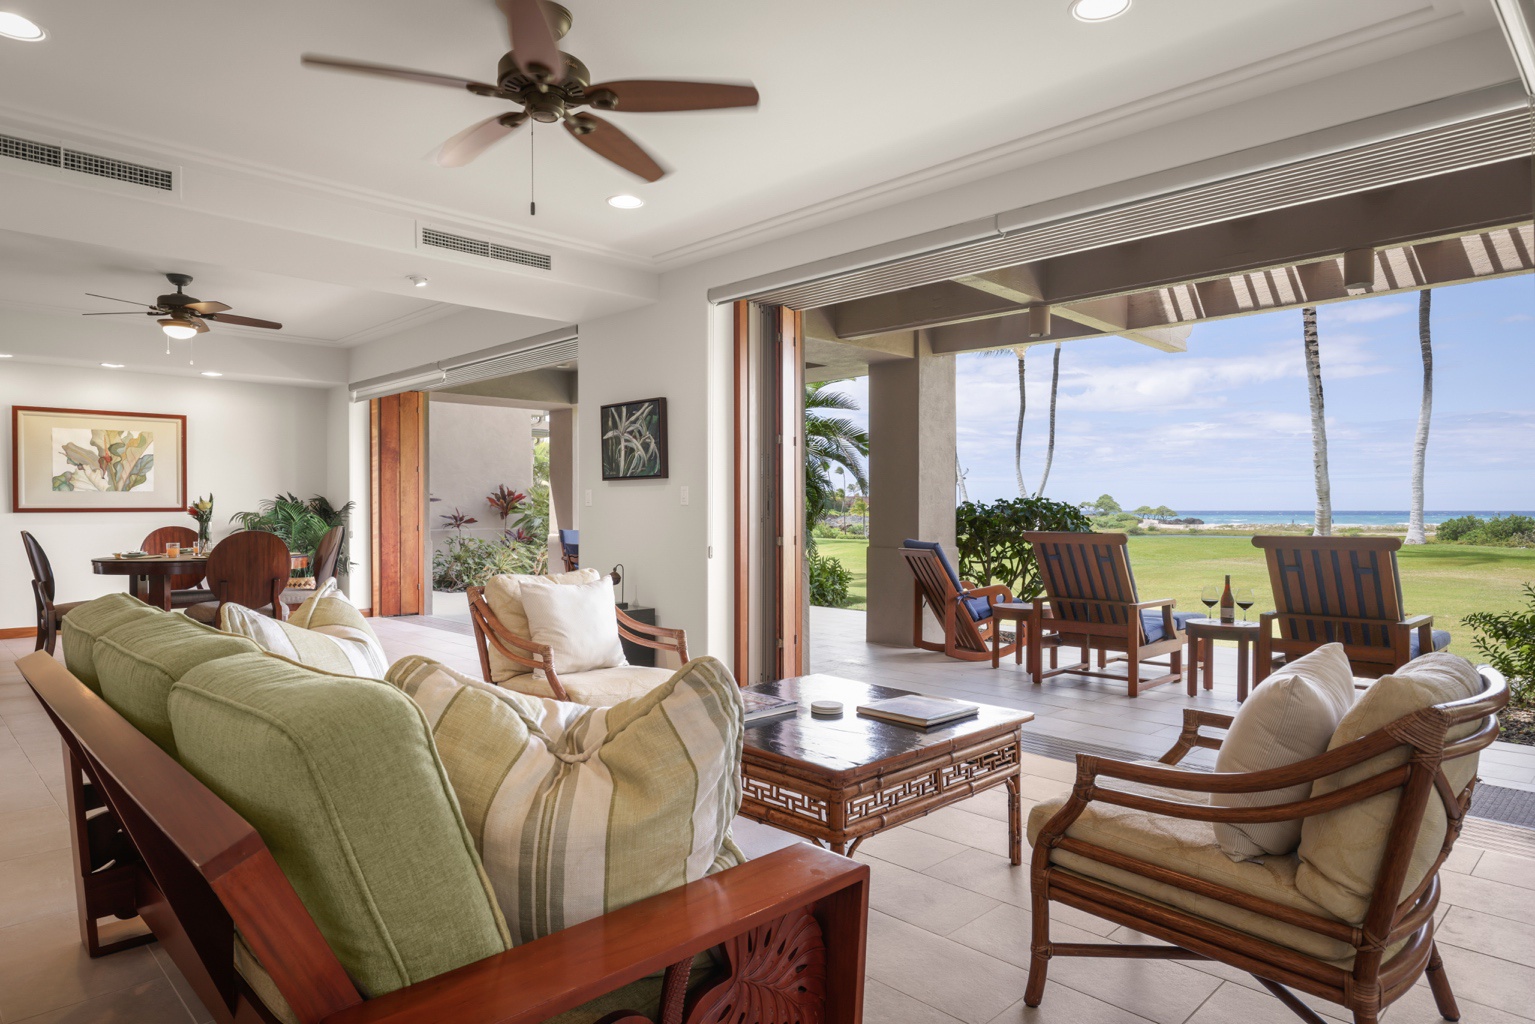 Kailua Kona Vacation Rentals, 3BD Golf Villa (3101) at Four Seasons Resort at Hualalai - Multiple seating areas in great room with recessed ceilings and gorgeous natural light.